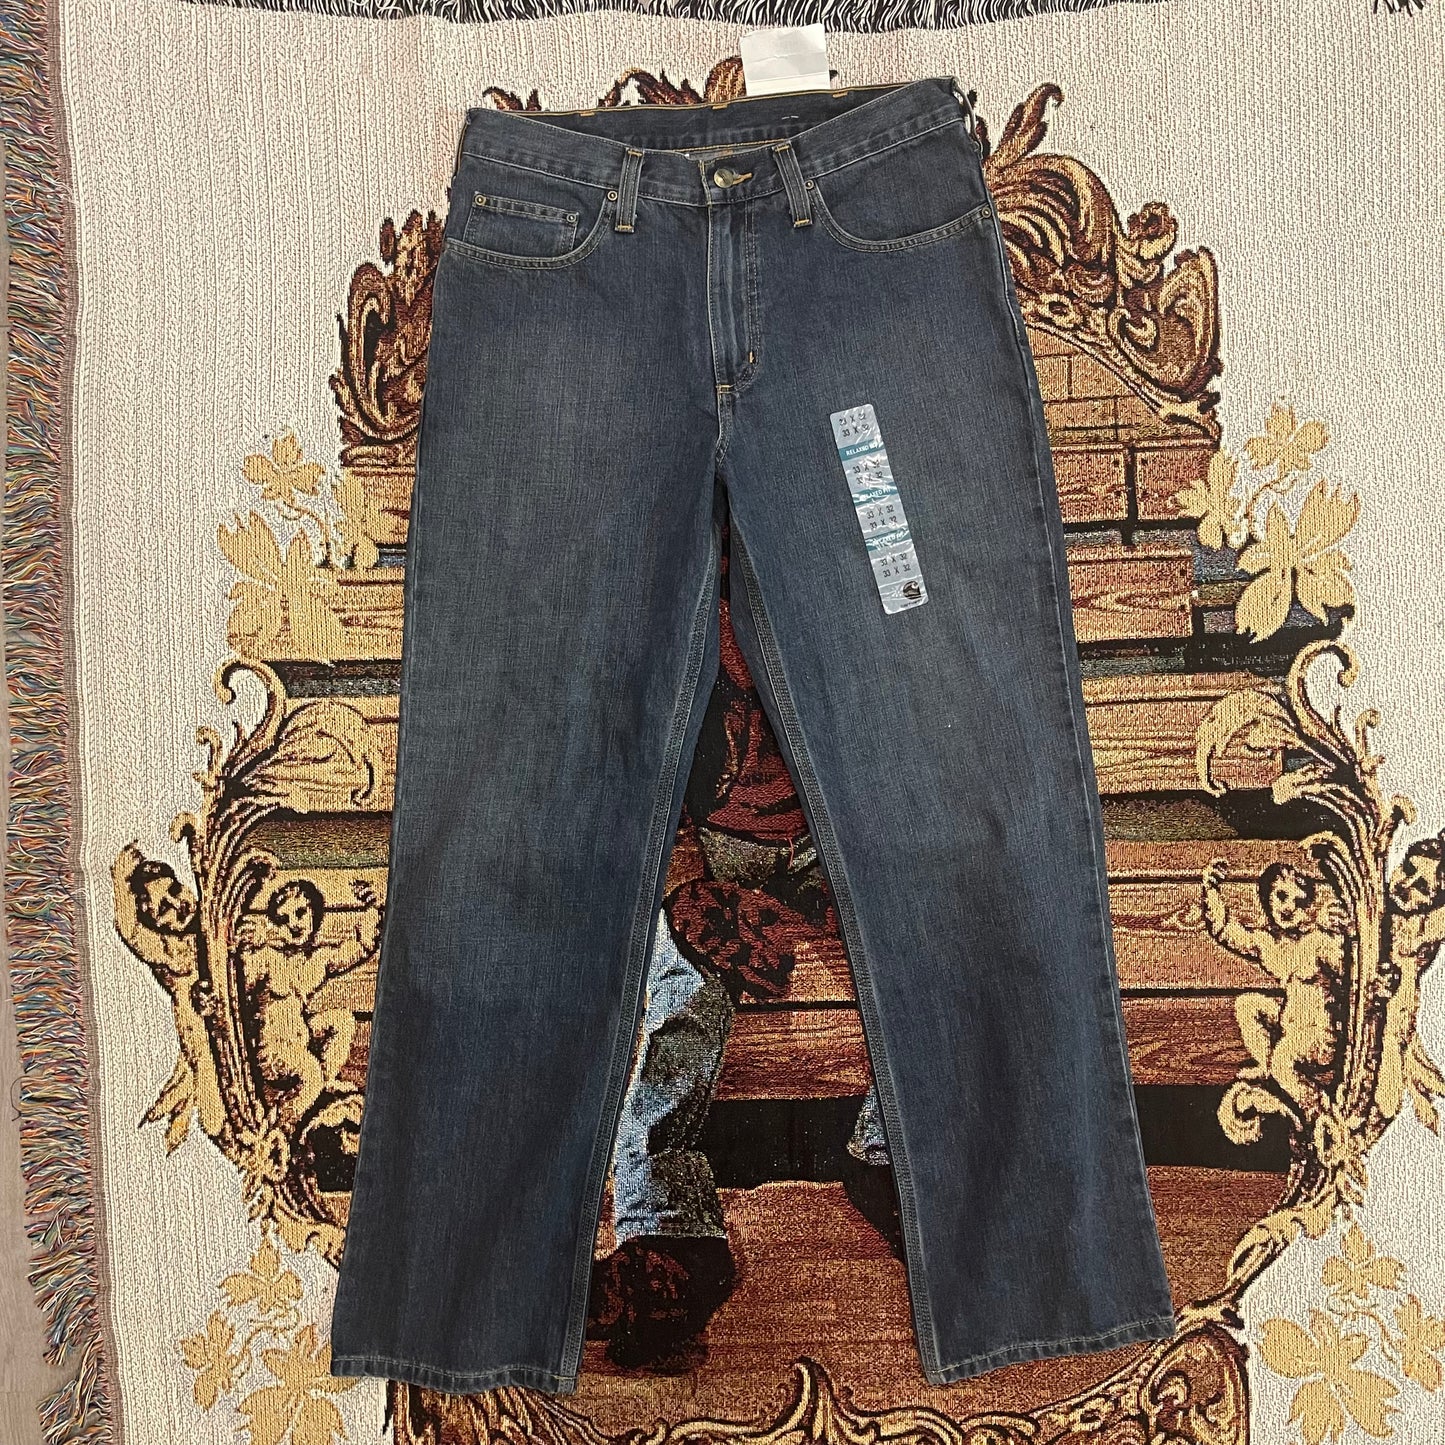 Carhartt Relaxed Fit jeans